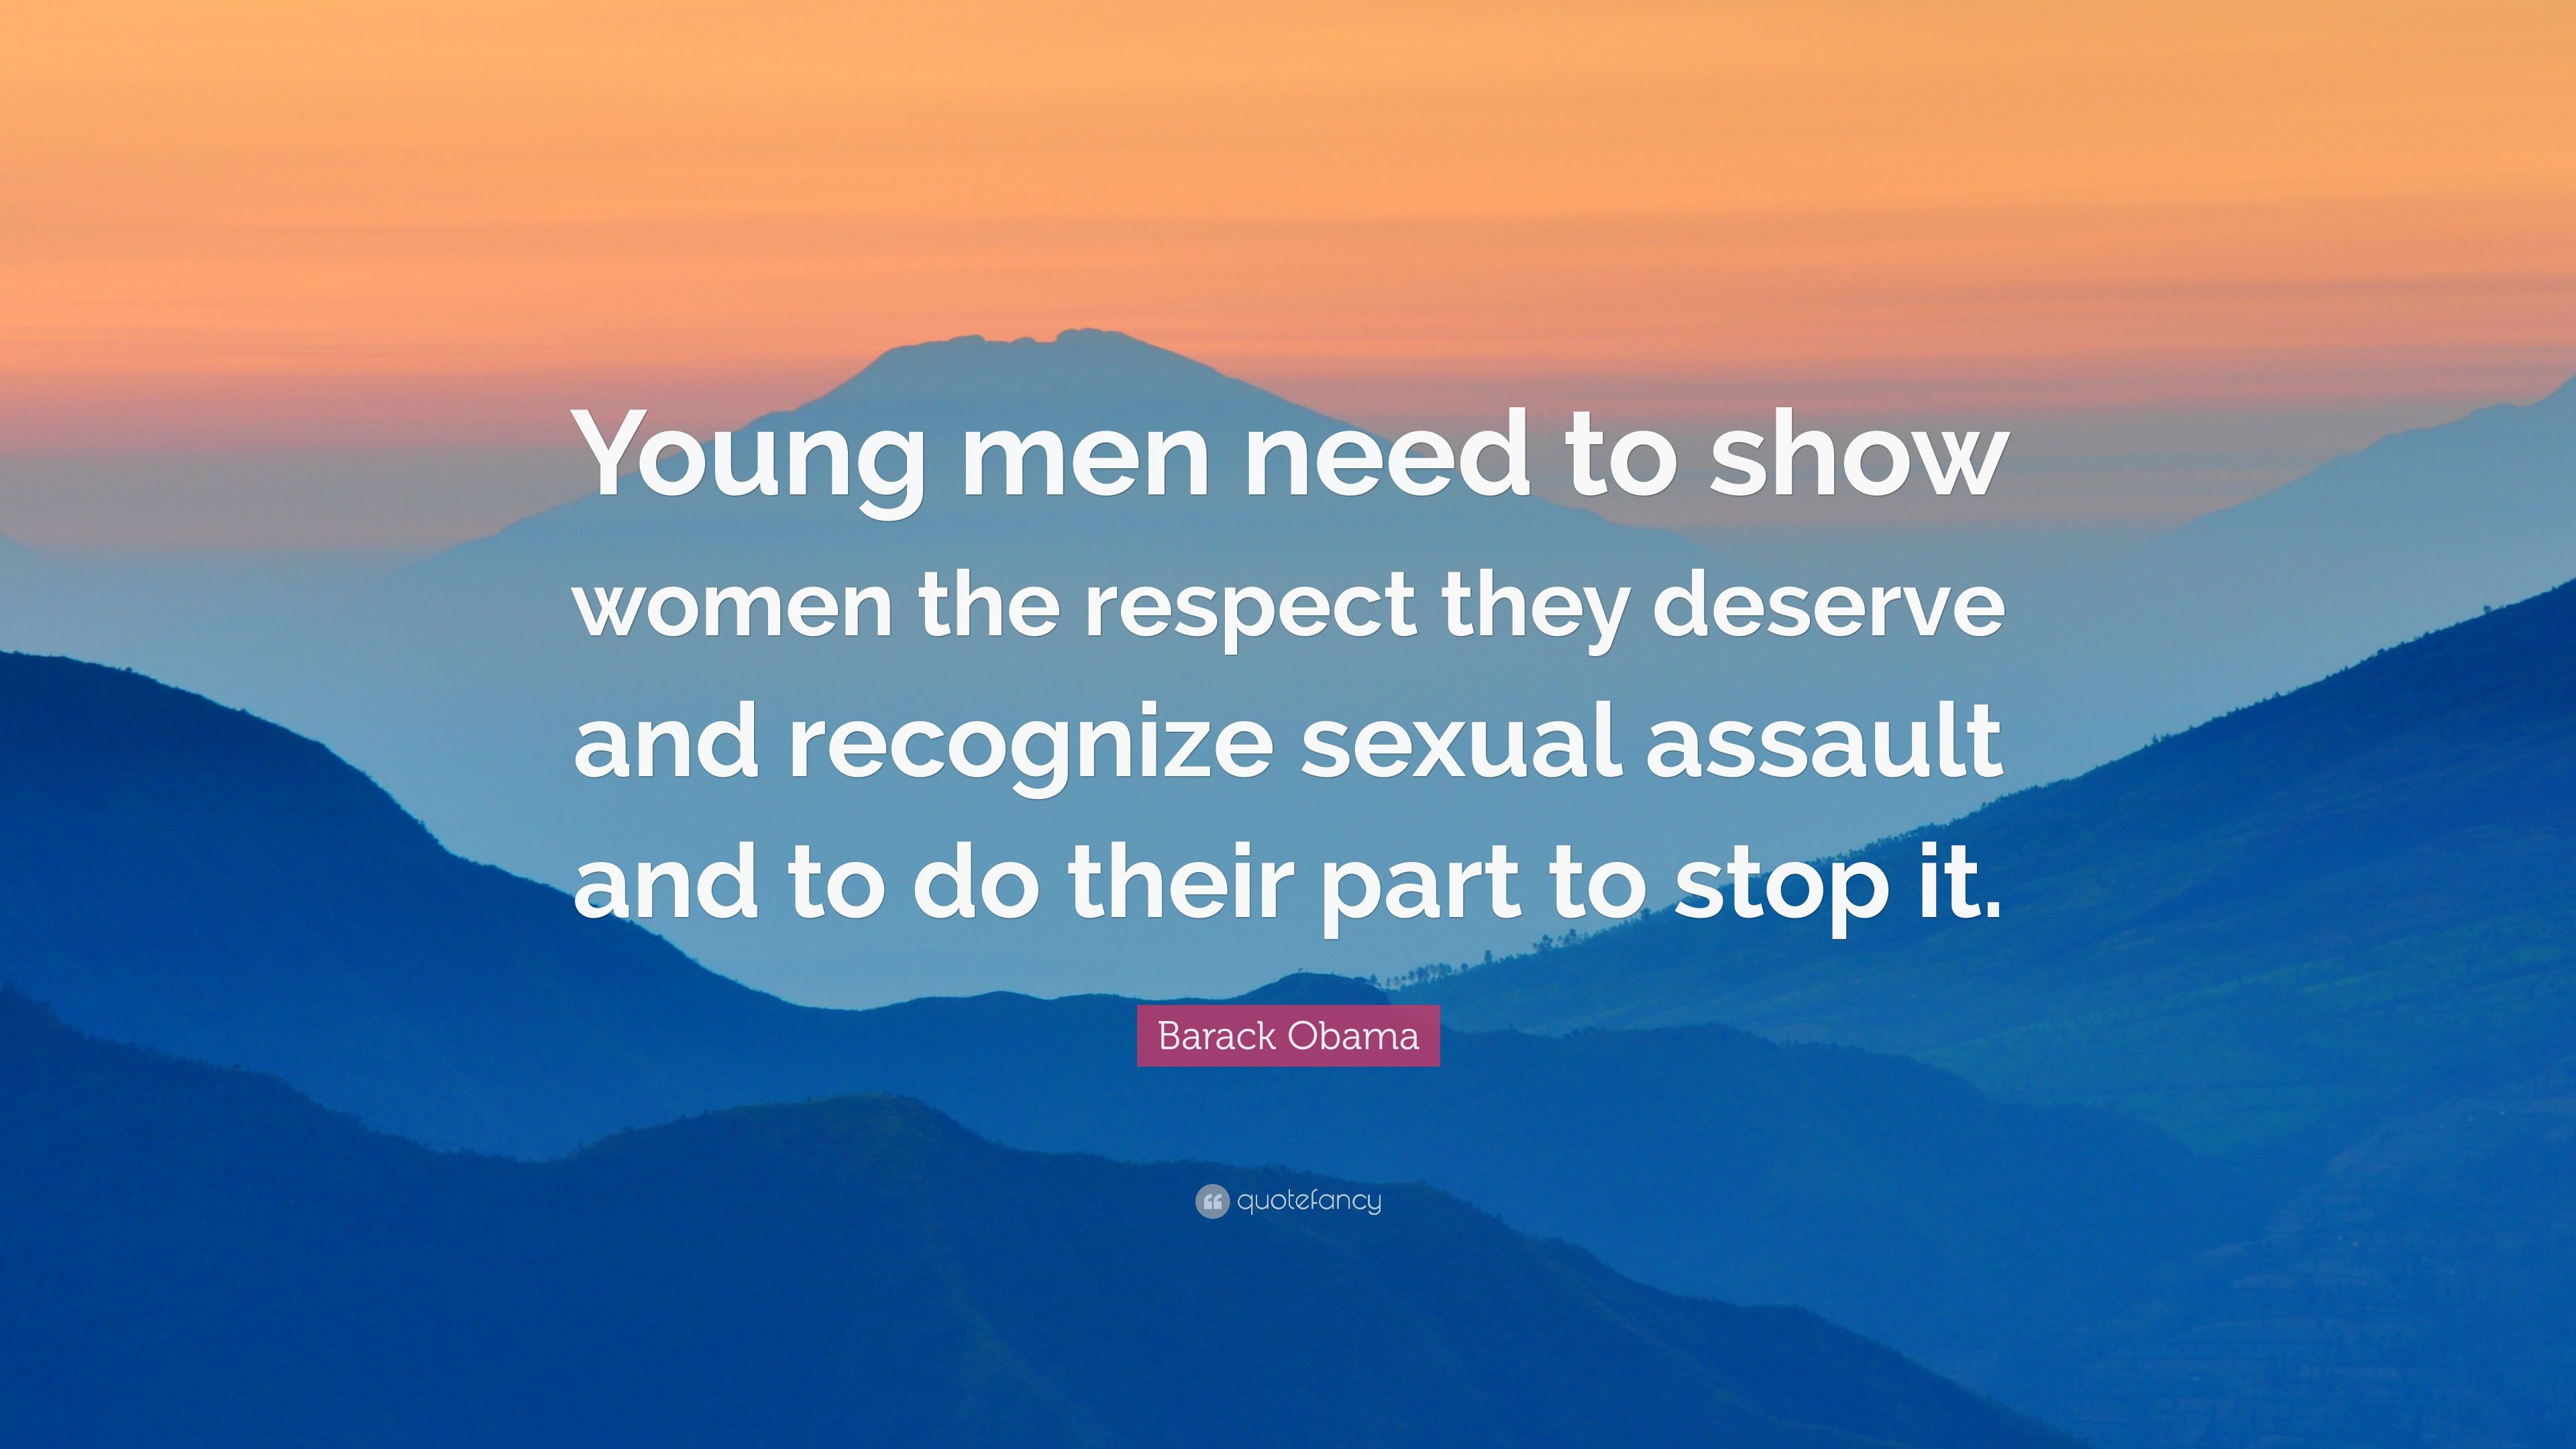 Barack Obama Quote: “Young men need to show women the respect they